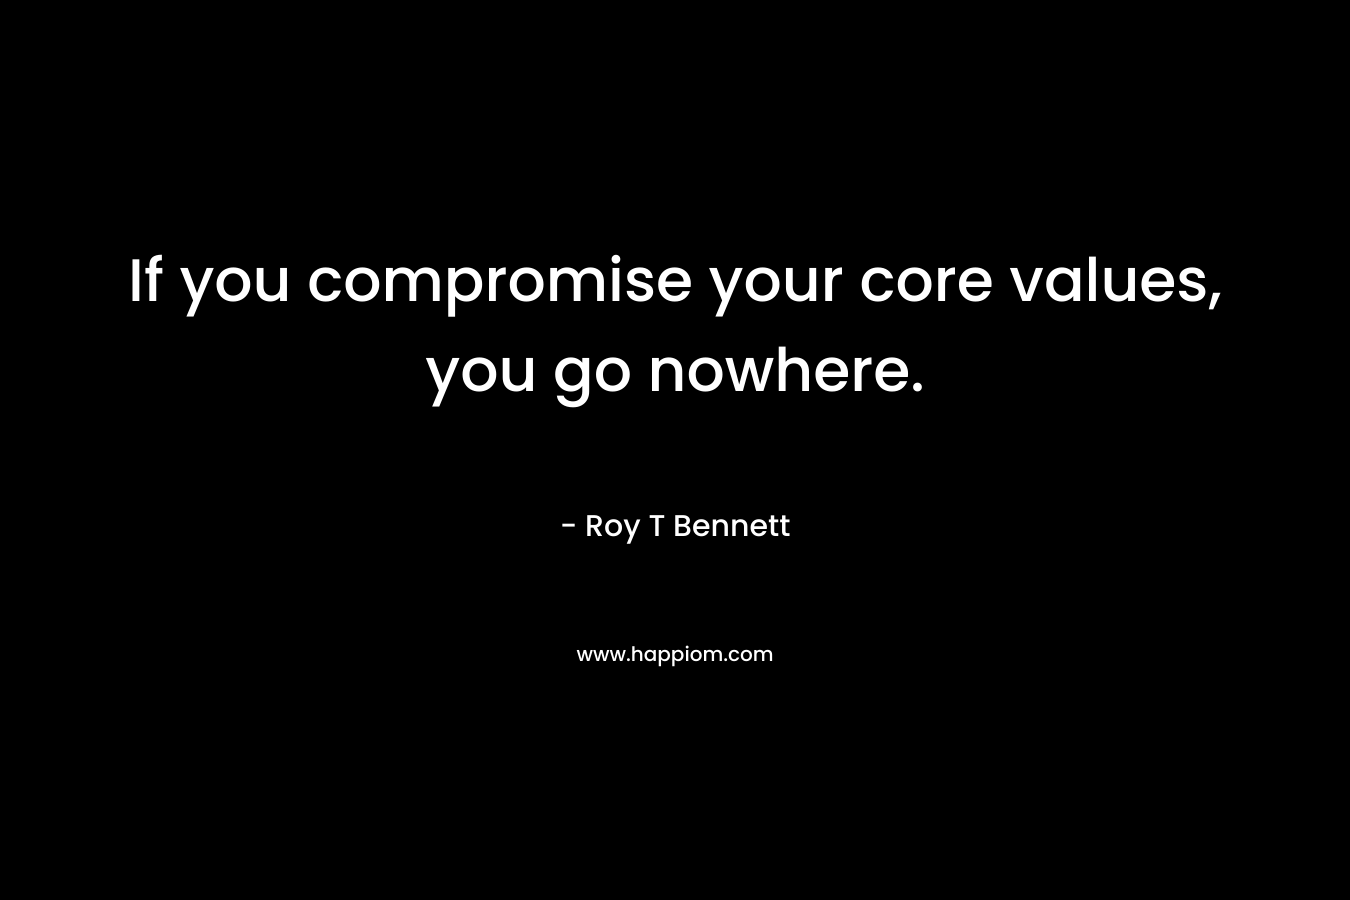 If you compromise your core values, you go nowhere.